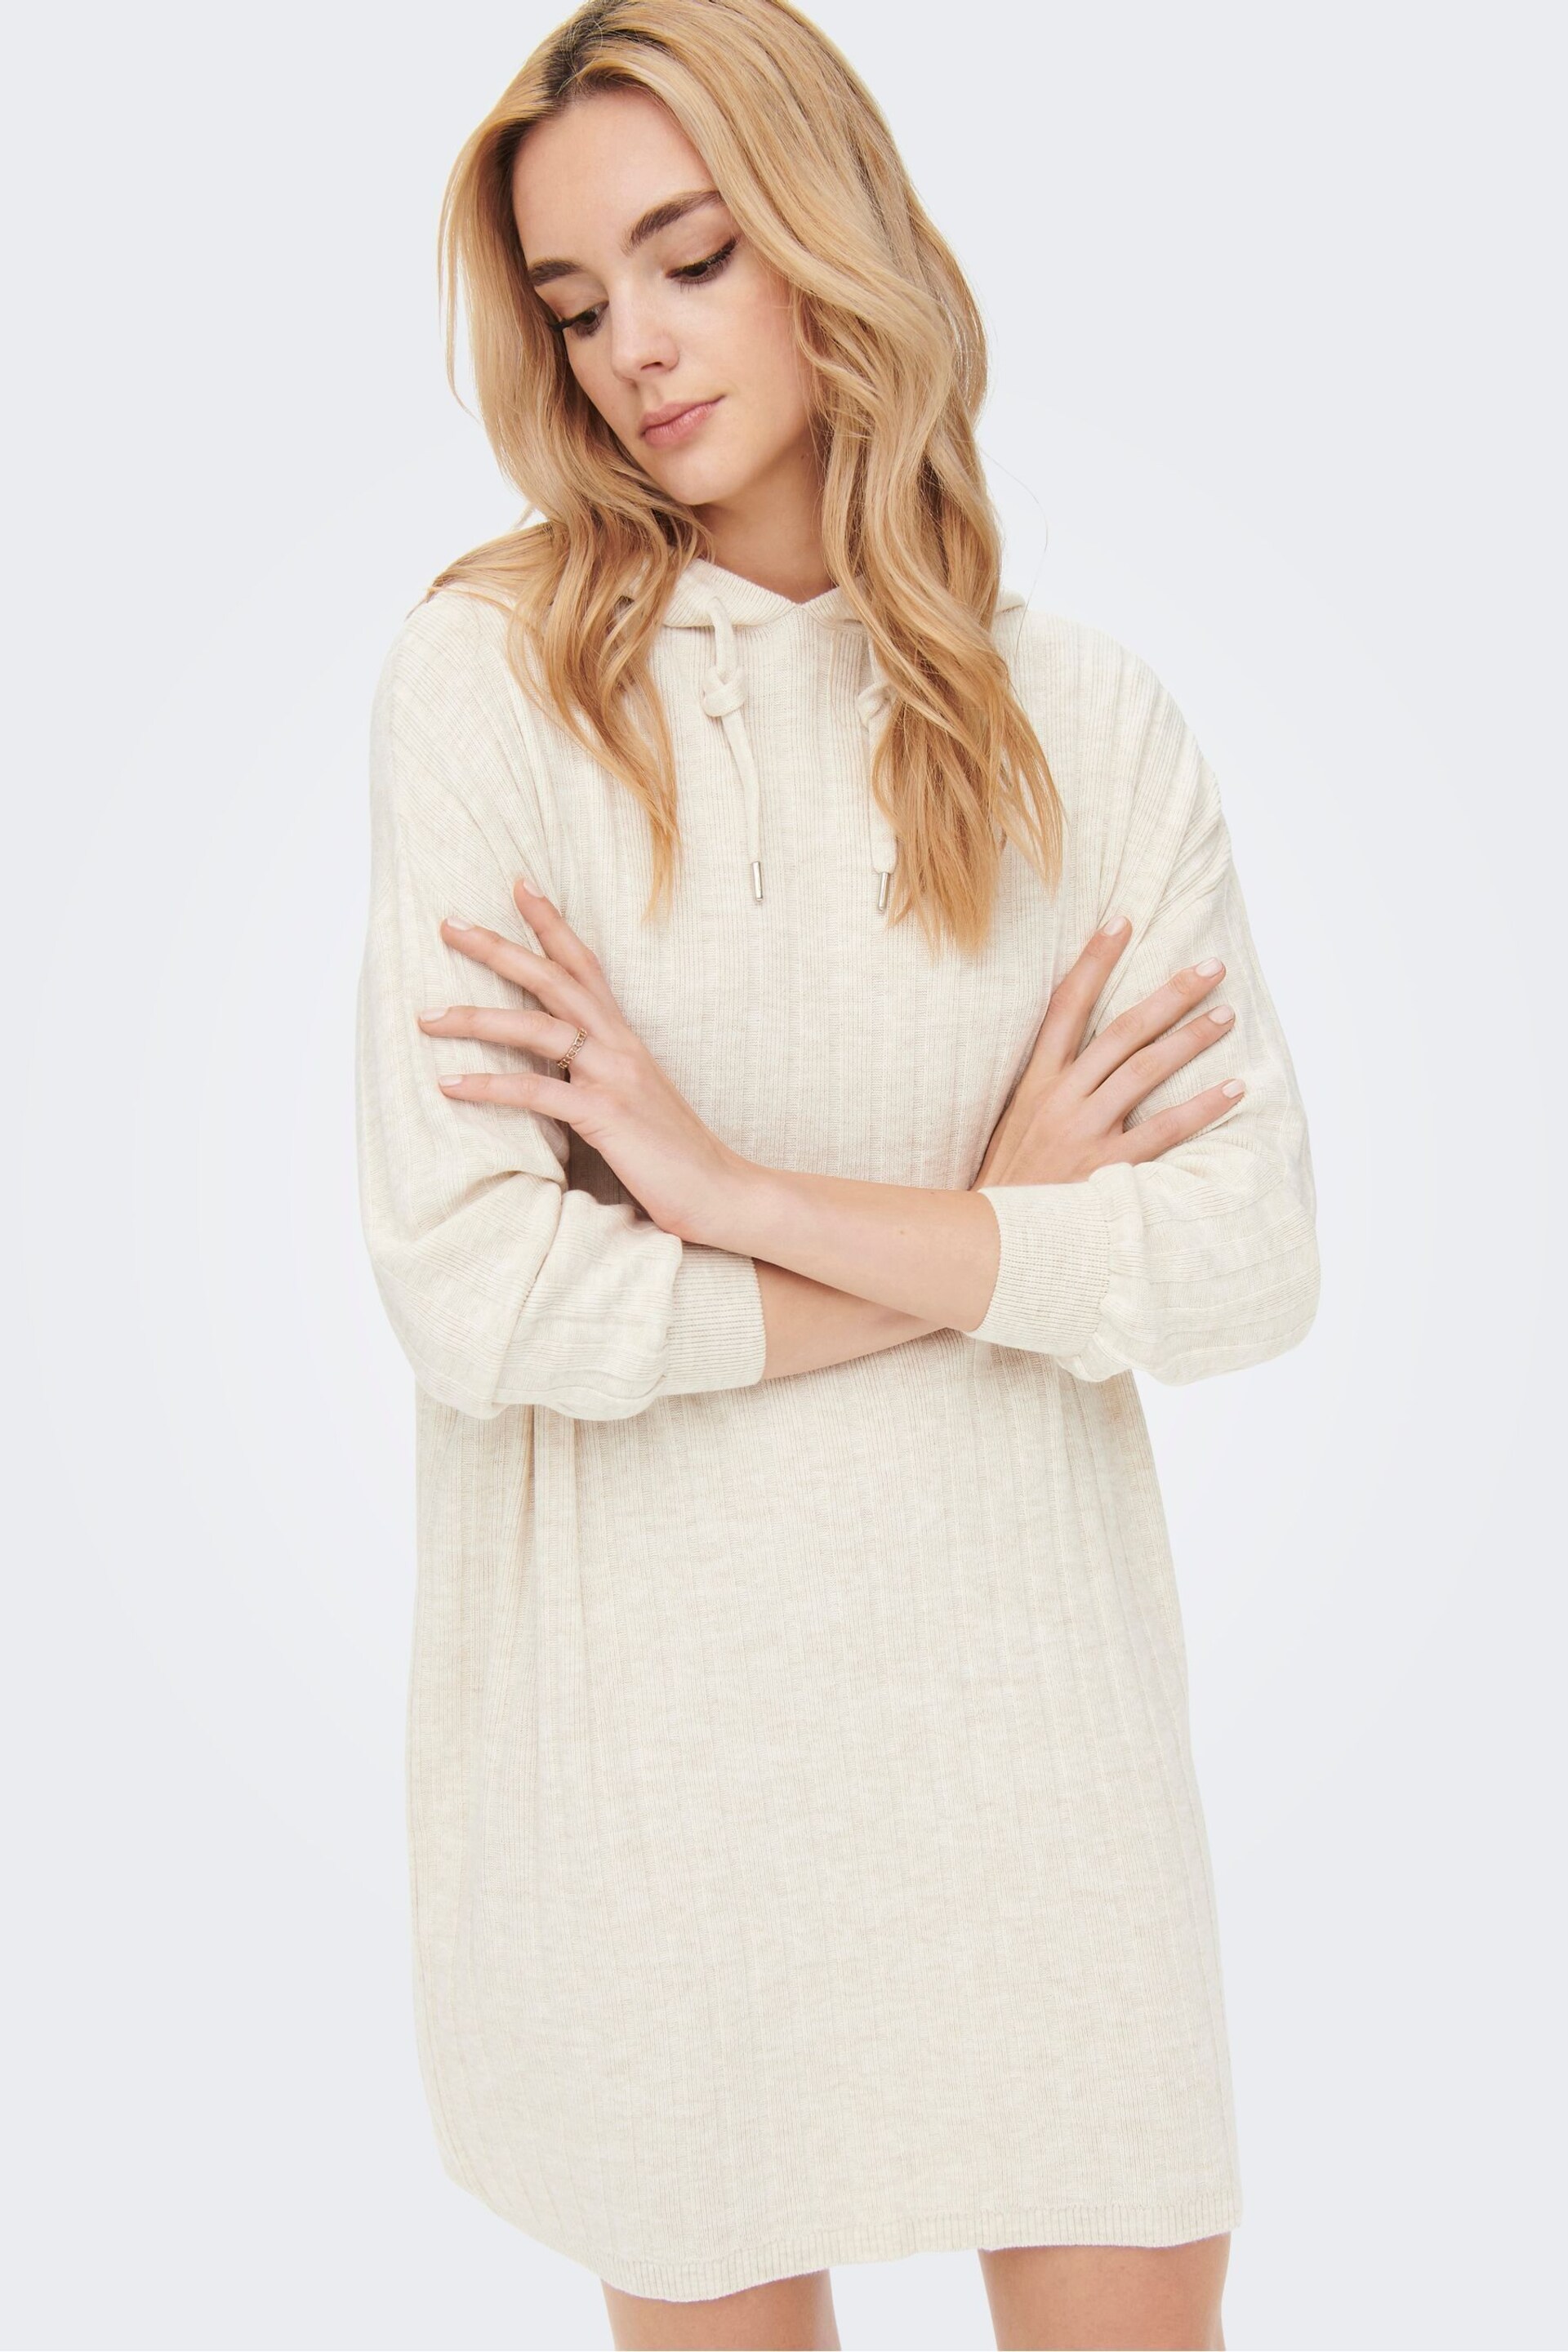 ONLY Cream Knitted Hooded Cosy Lounge Jumper Dress - Image 1 of 6